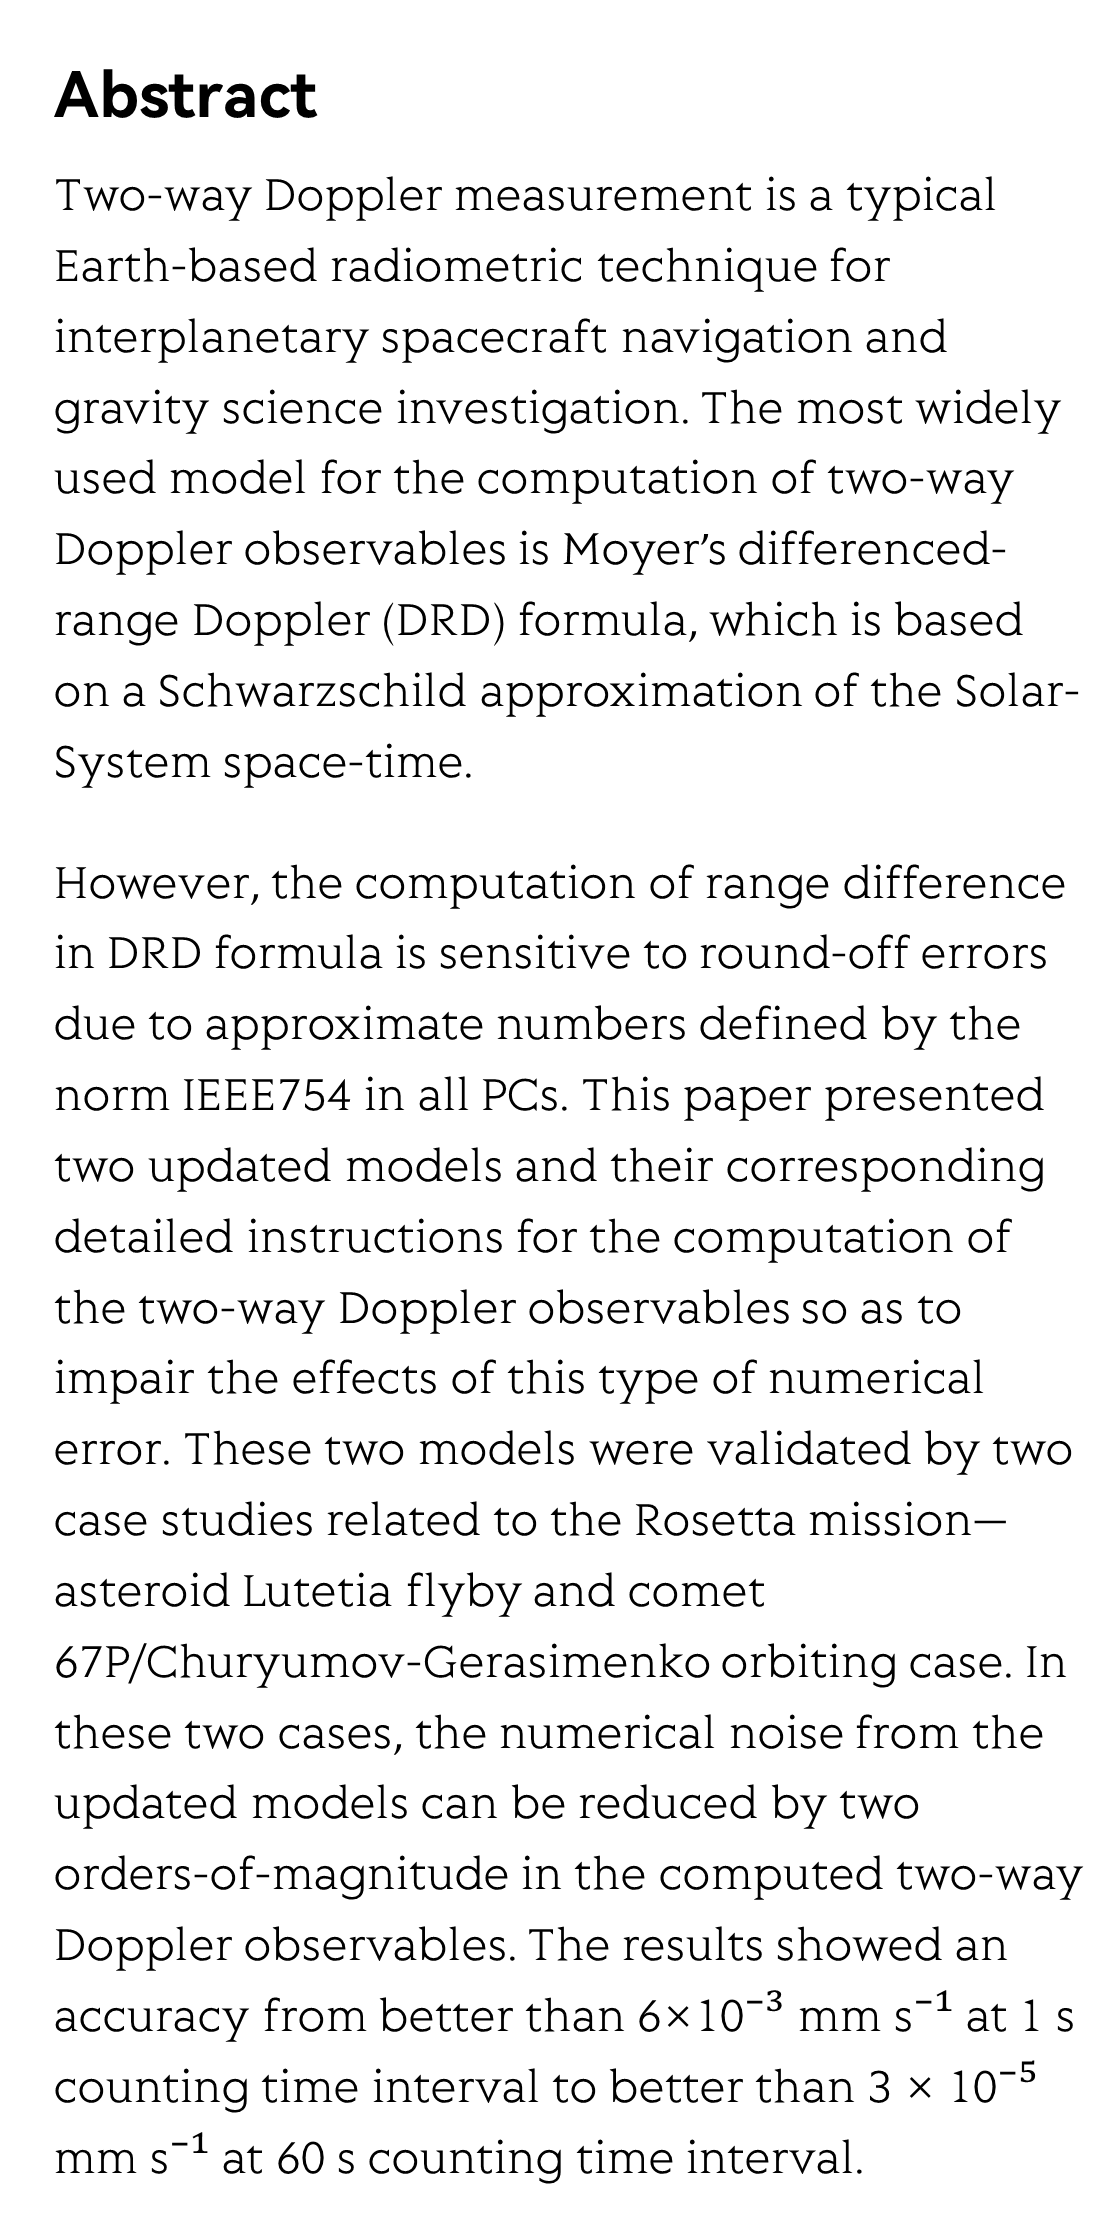 Reducing loss of significance in the computation of Earth-based two-way Doppler observables for small body missions_2